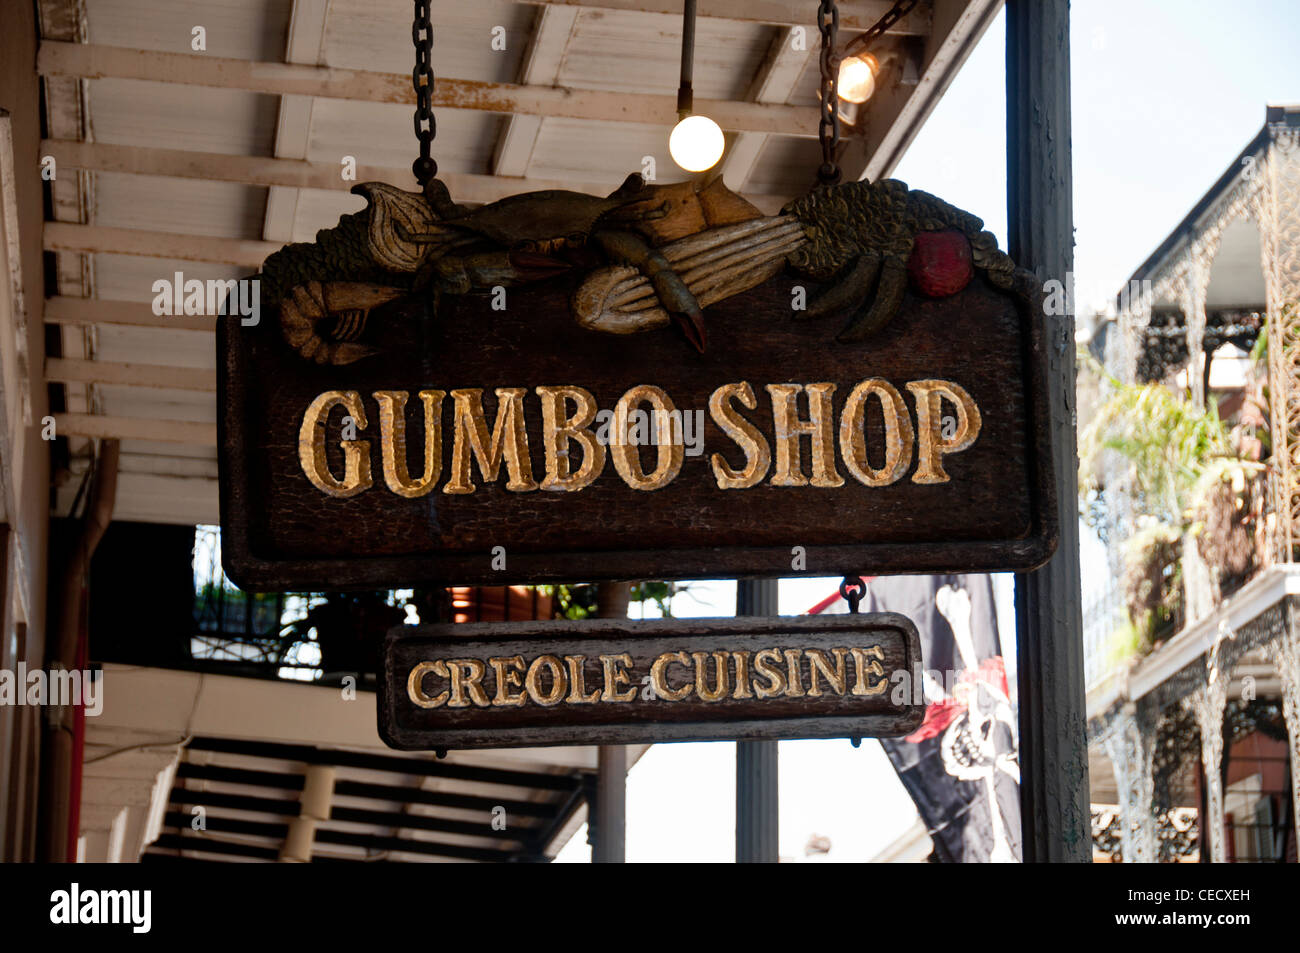 Gumbo shop in New Orleans French Quarter Stock Photo